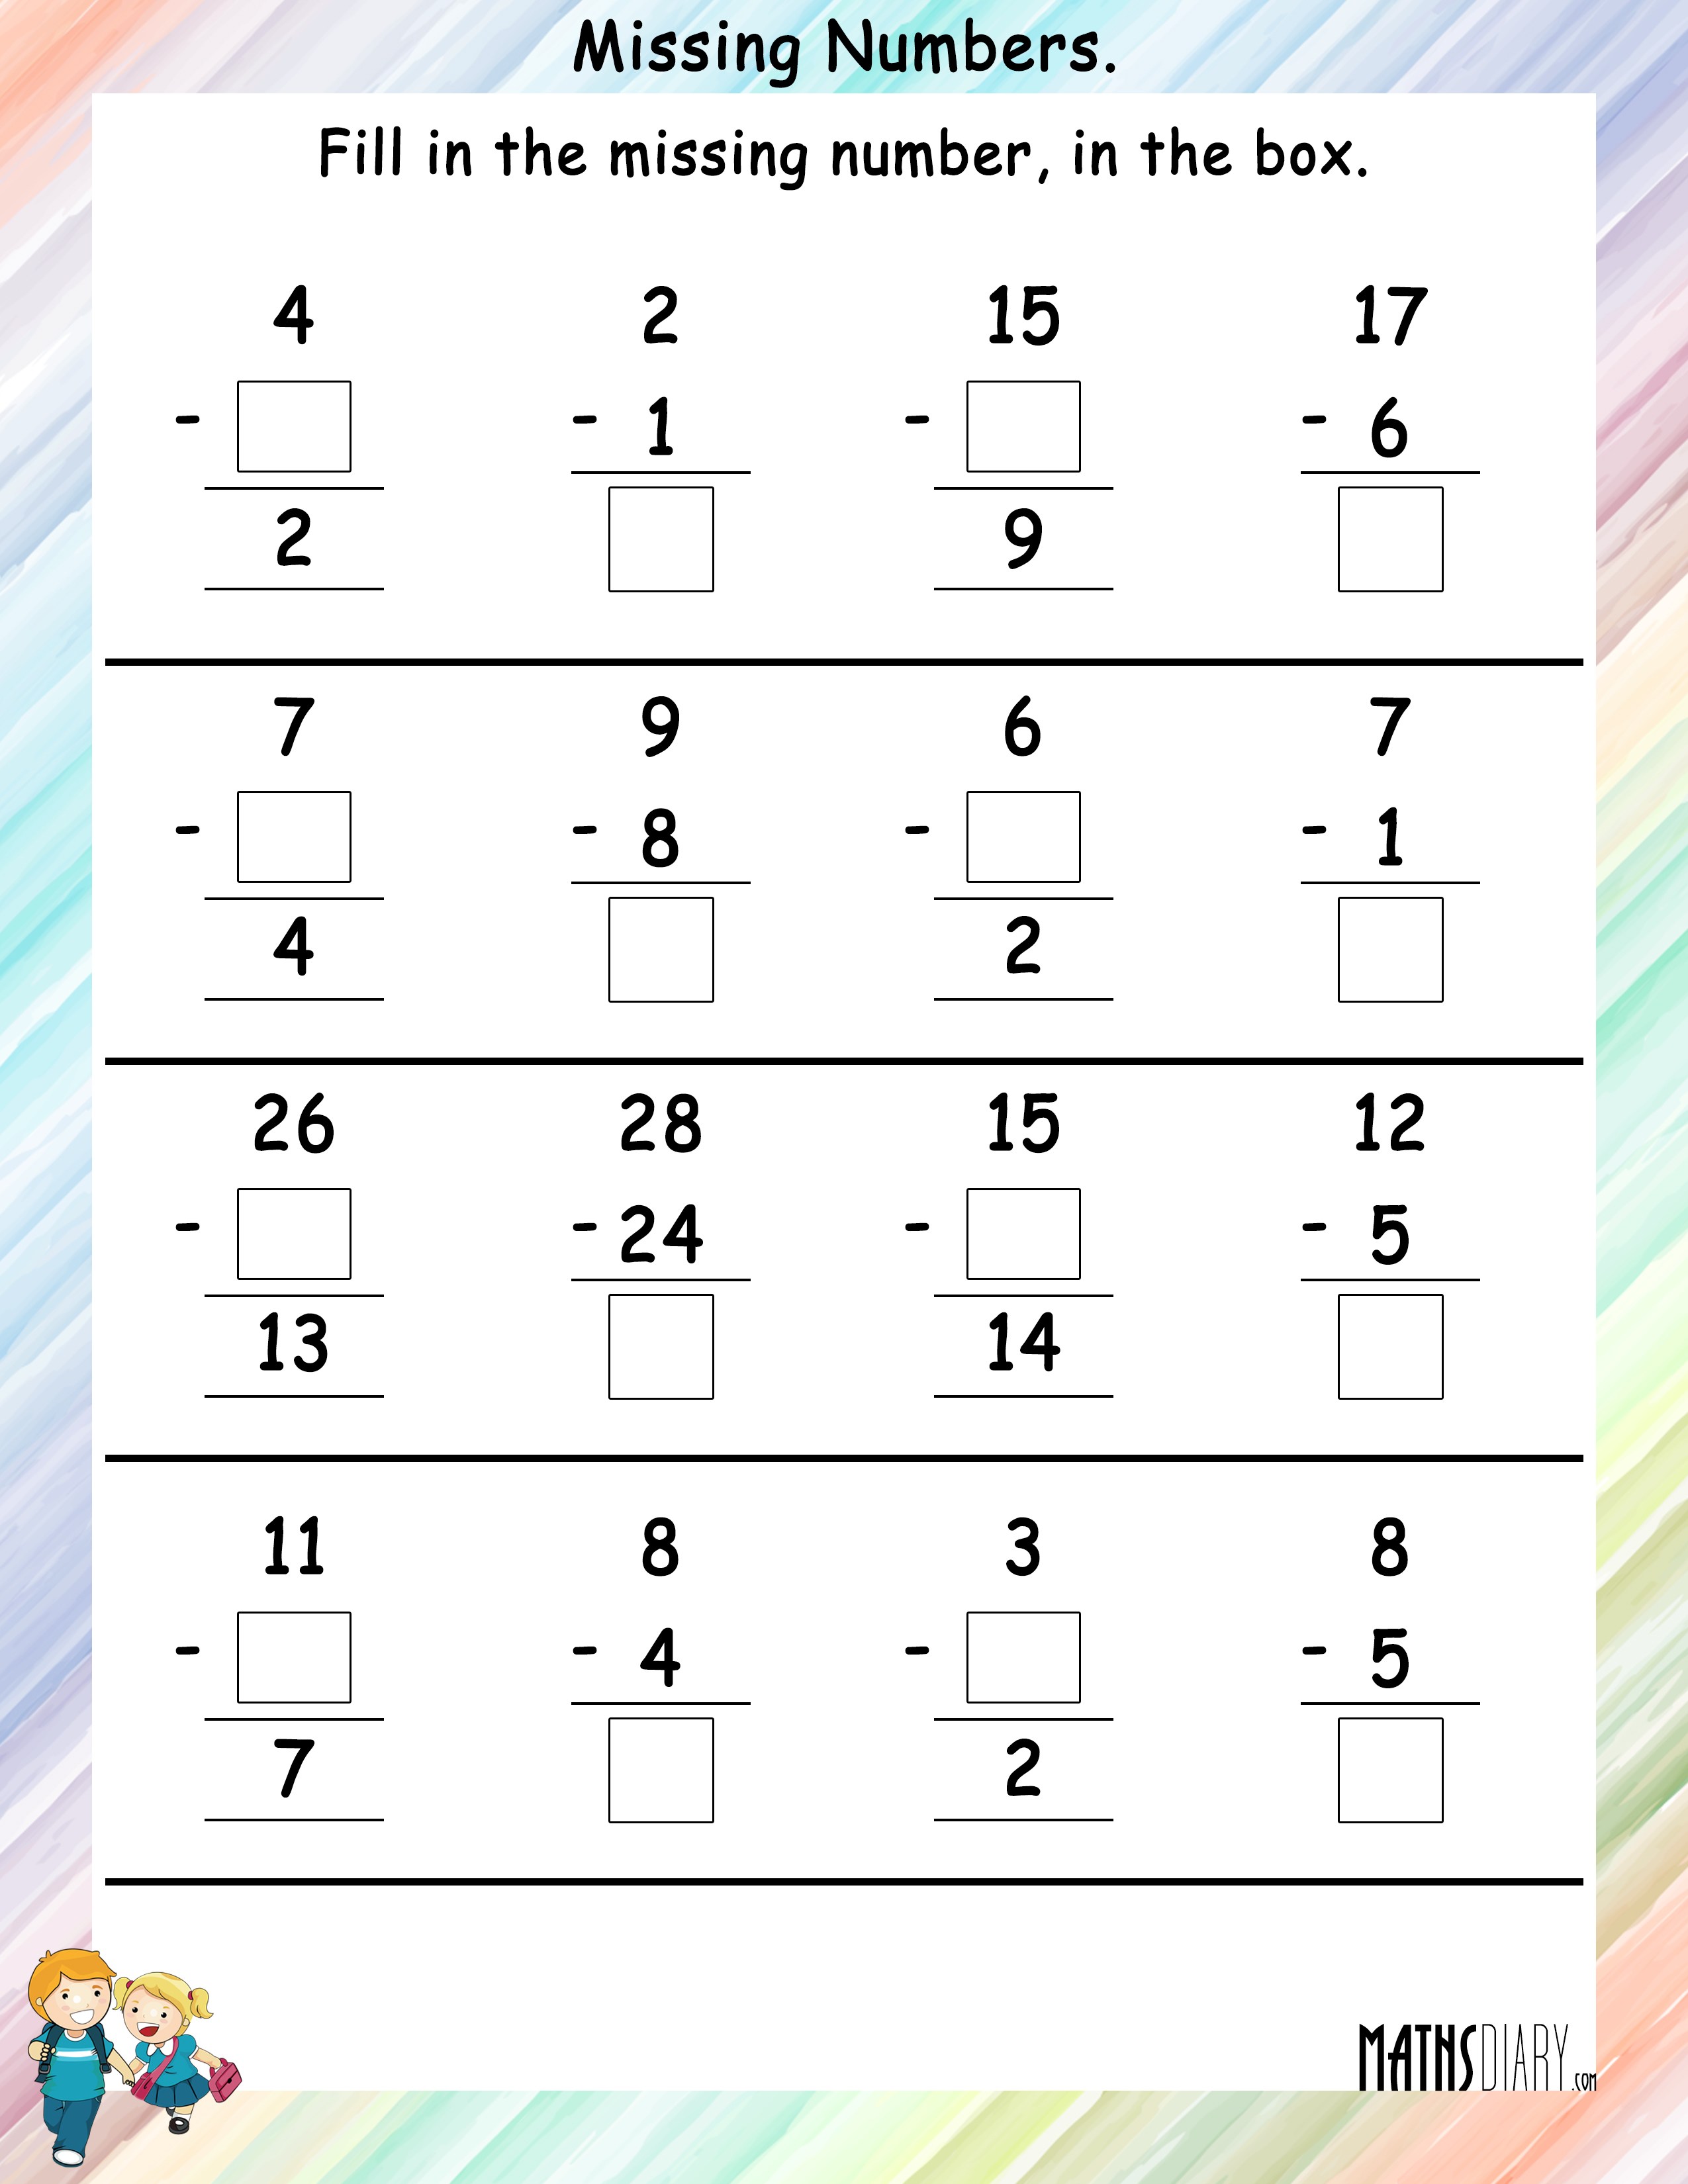 multiplication-table-missing-numbers-premium-vector-paste-the-missing-numbers-learning